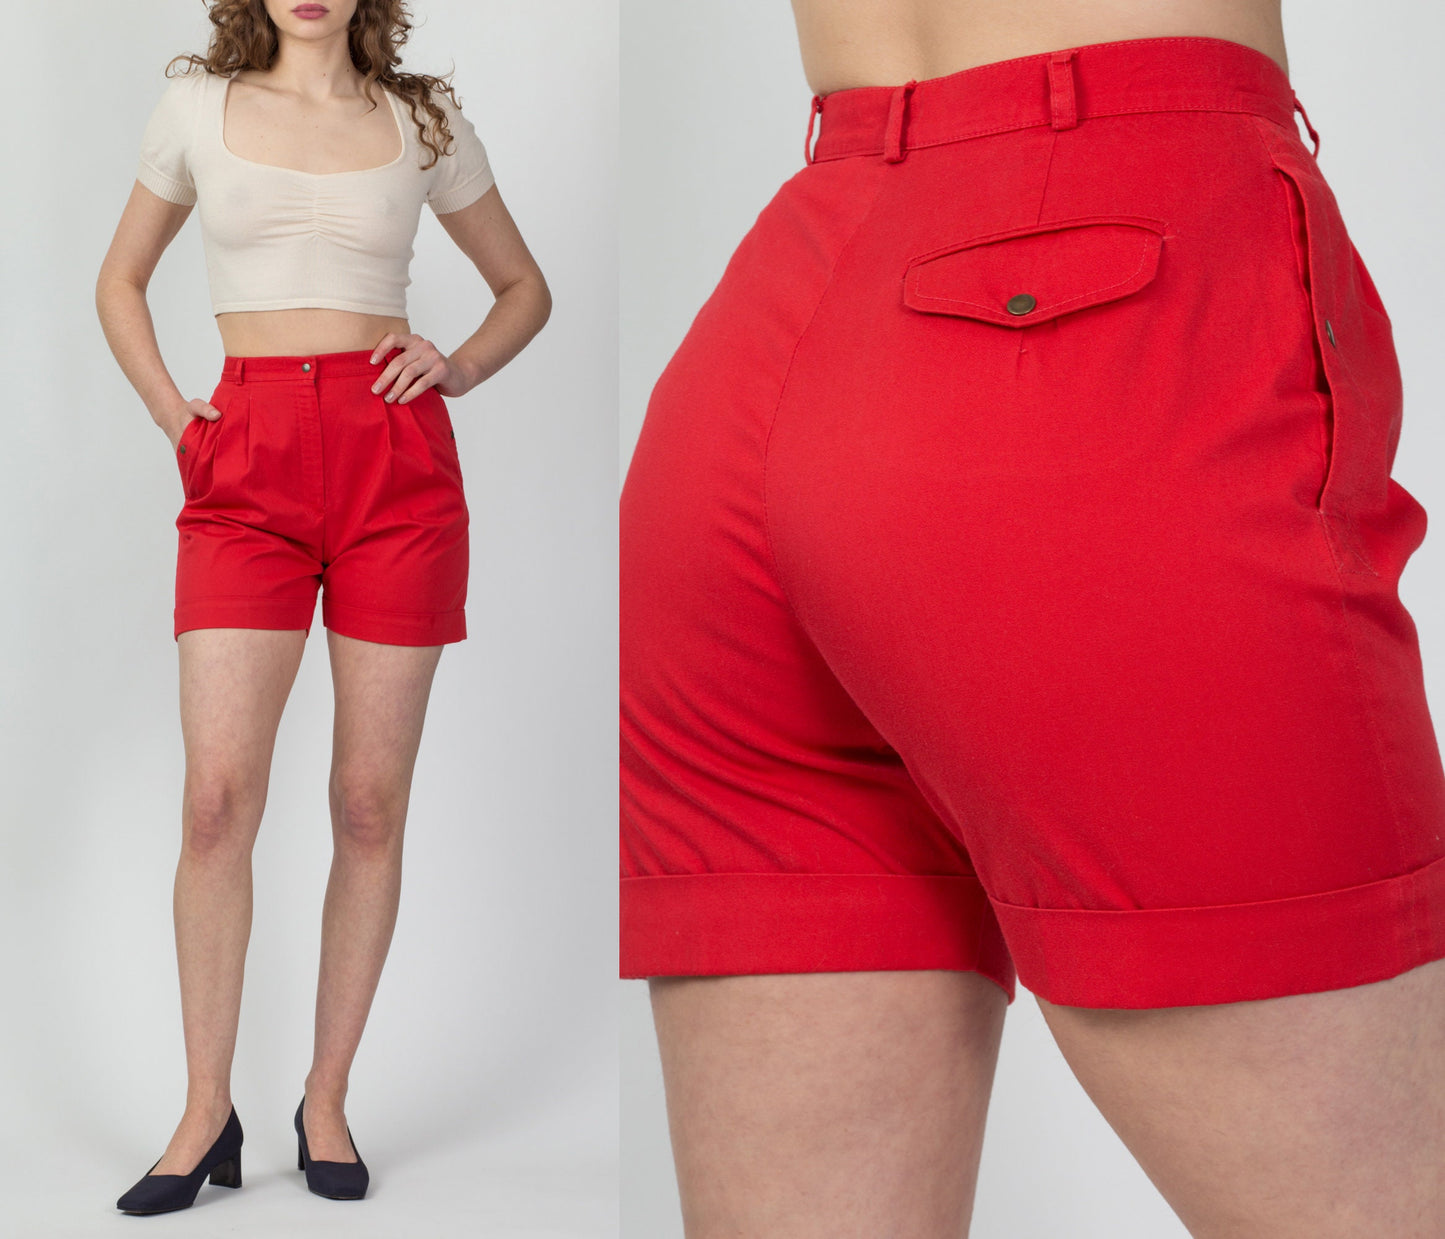 70s Bright Red High Waist Shorts - Extra Small, 25.25" 